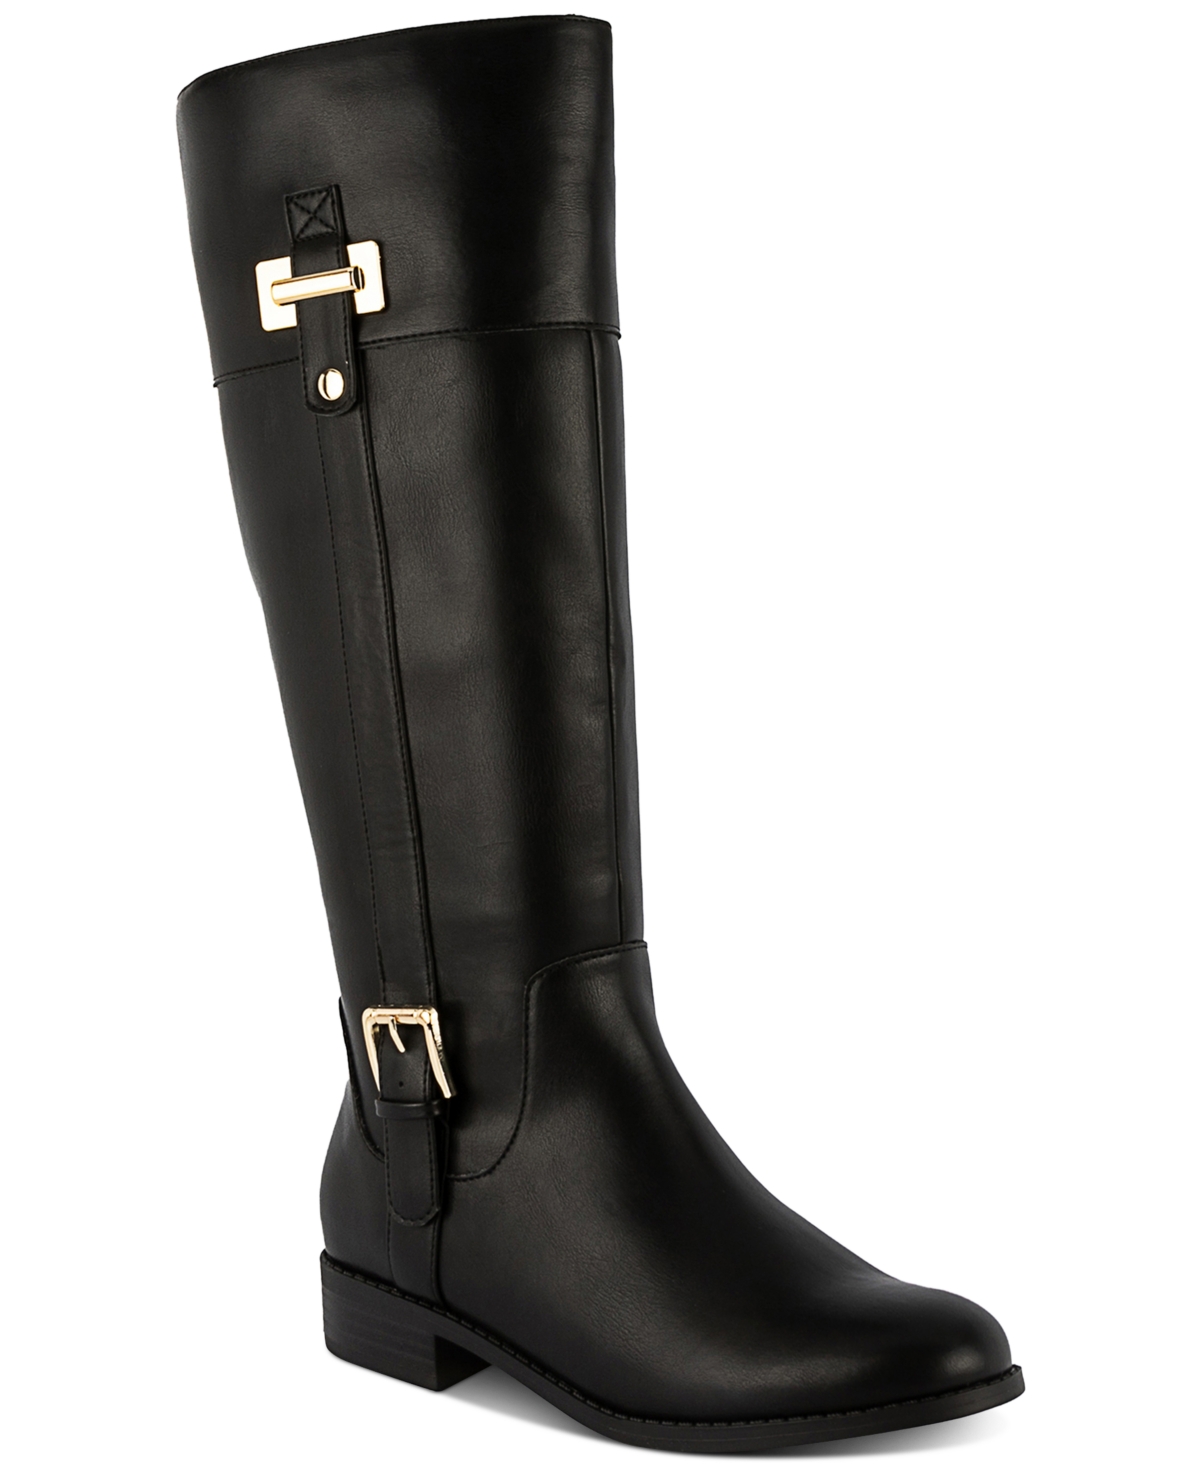 Women's Edenn Buckled Riding Boots, Created for Macy's - Chocolate